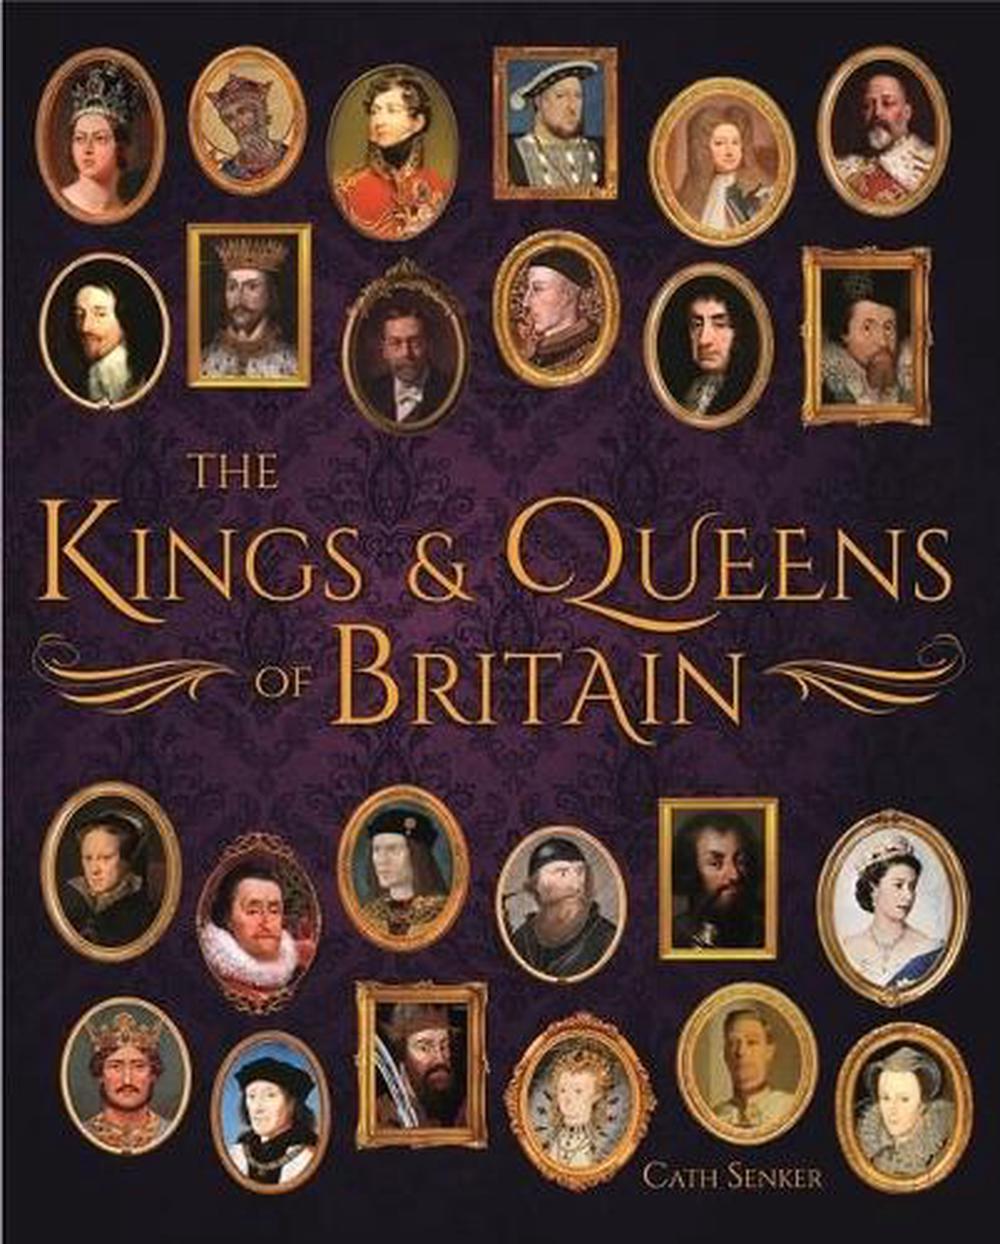 The Kings & Queens of Britain by Cath Senker (English) Hardcover Book